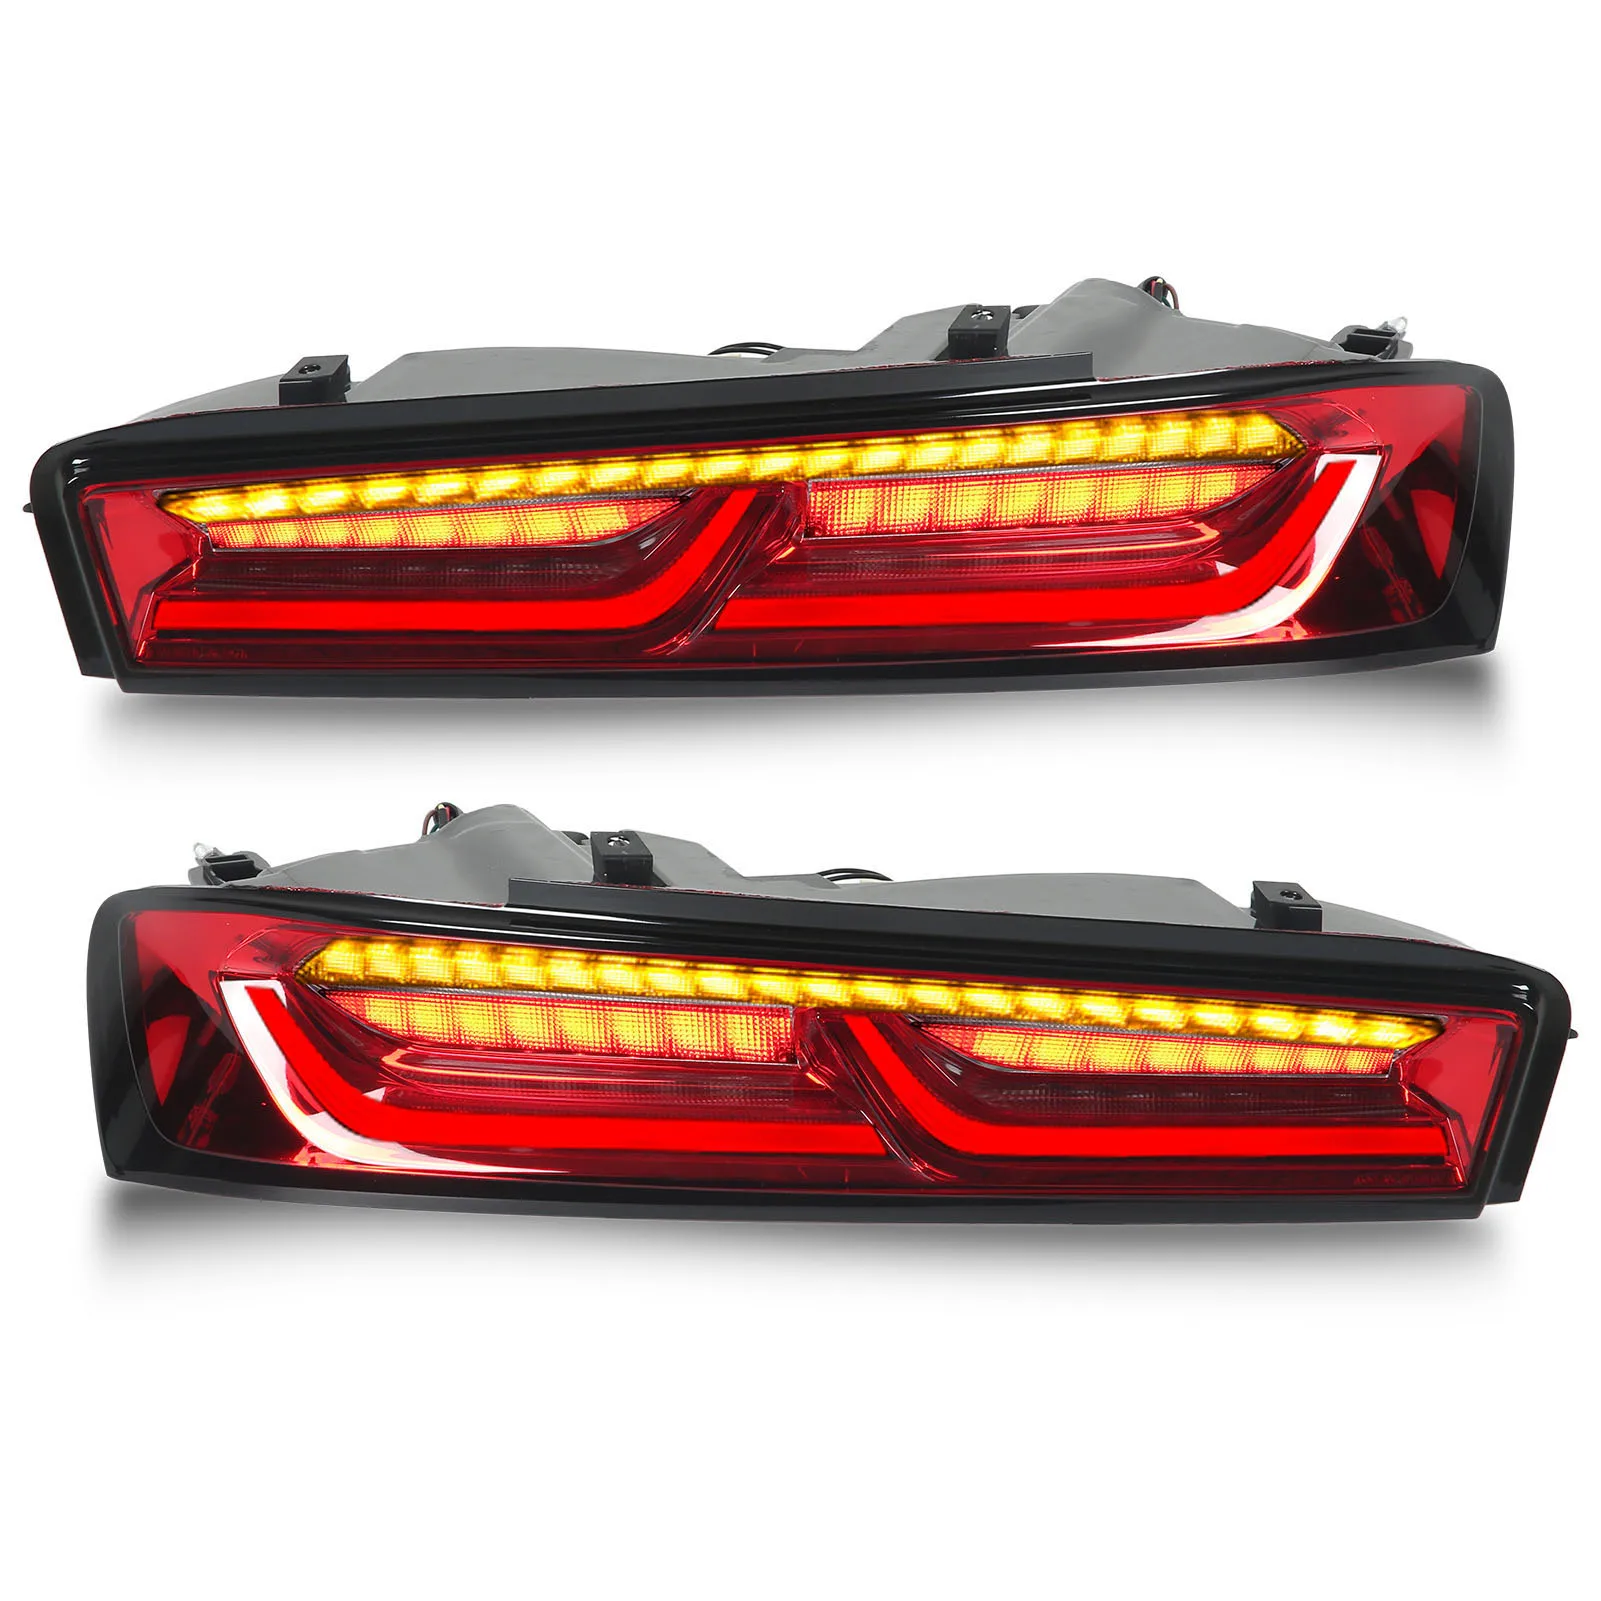 

LED Taillight Assembly IP67 Waterproof Rear Brake Turn Signal Light Replacement for Chevrolet Camaro 2016‑2018 EU Model Taillamp